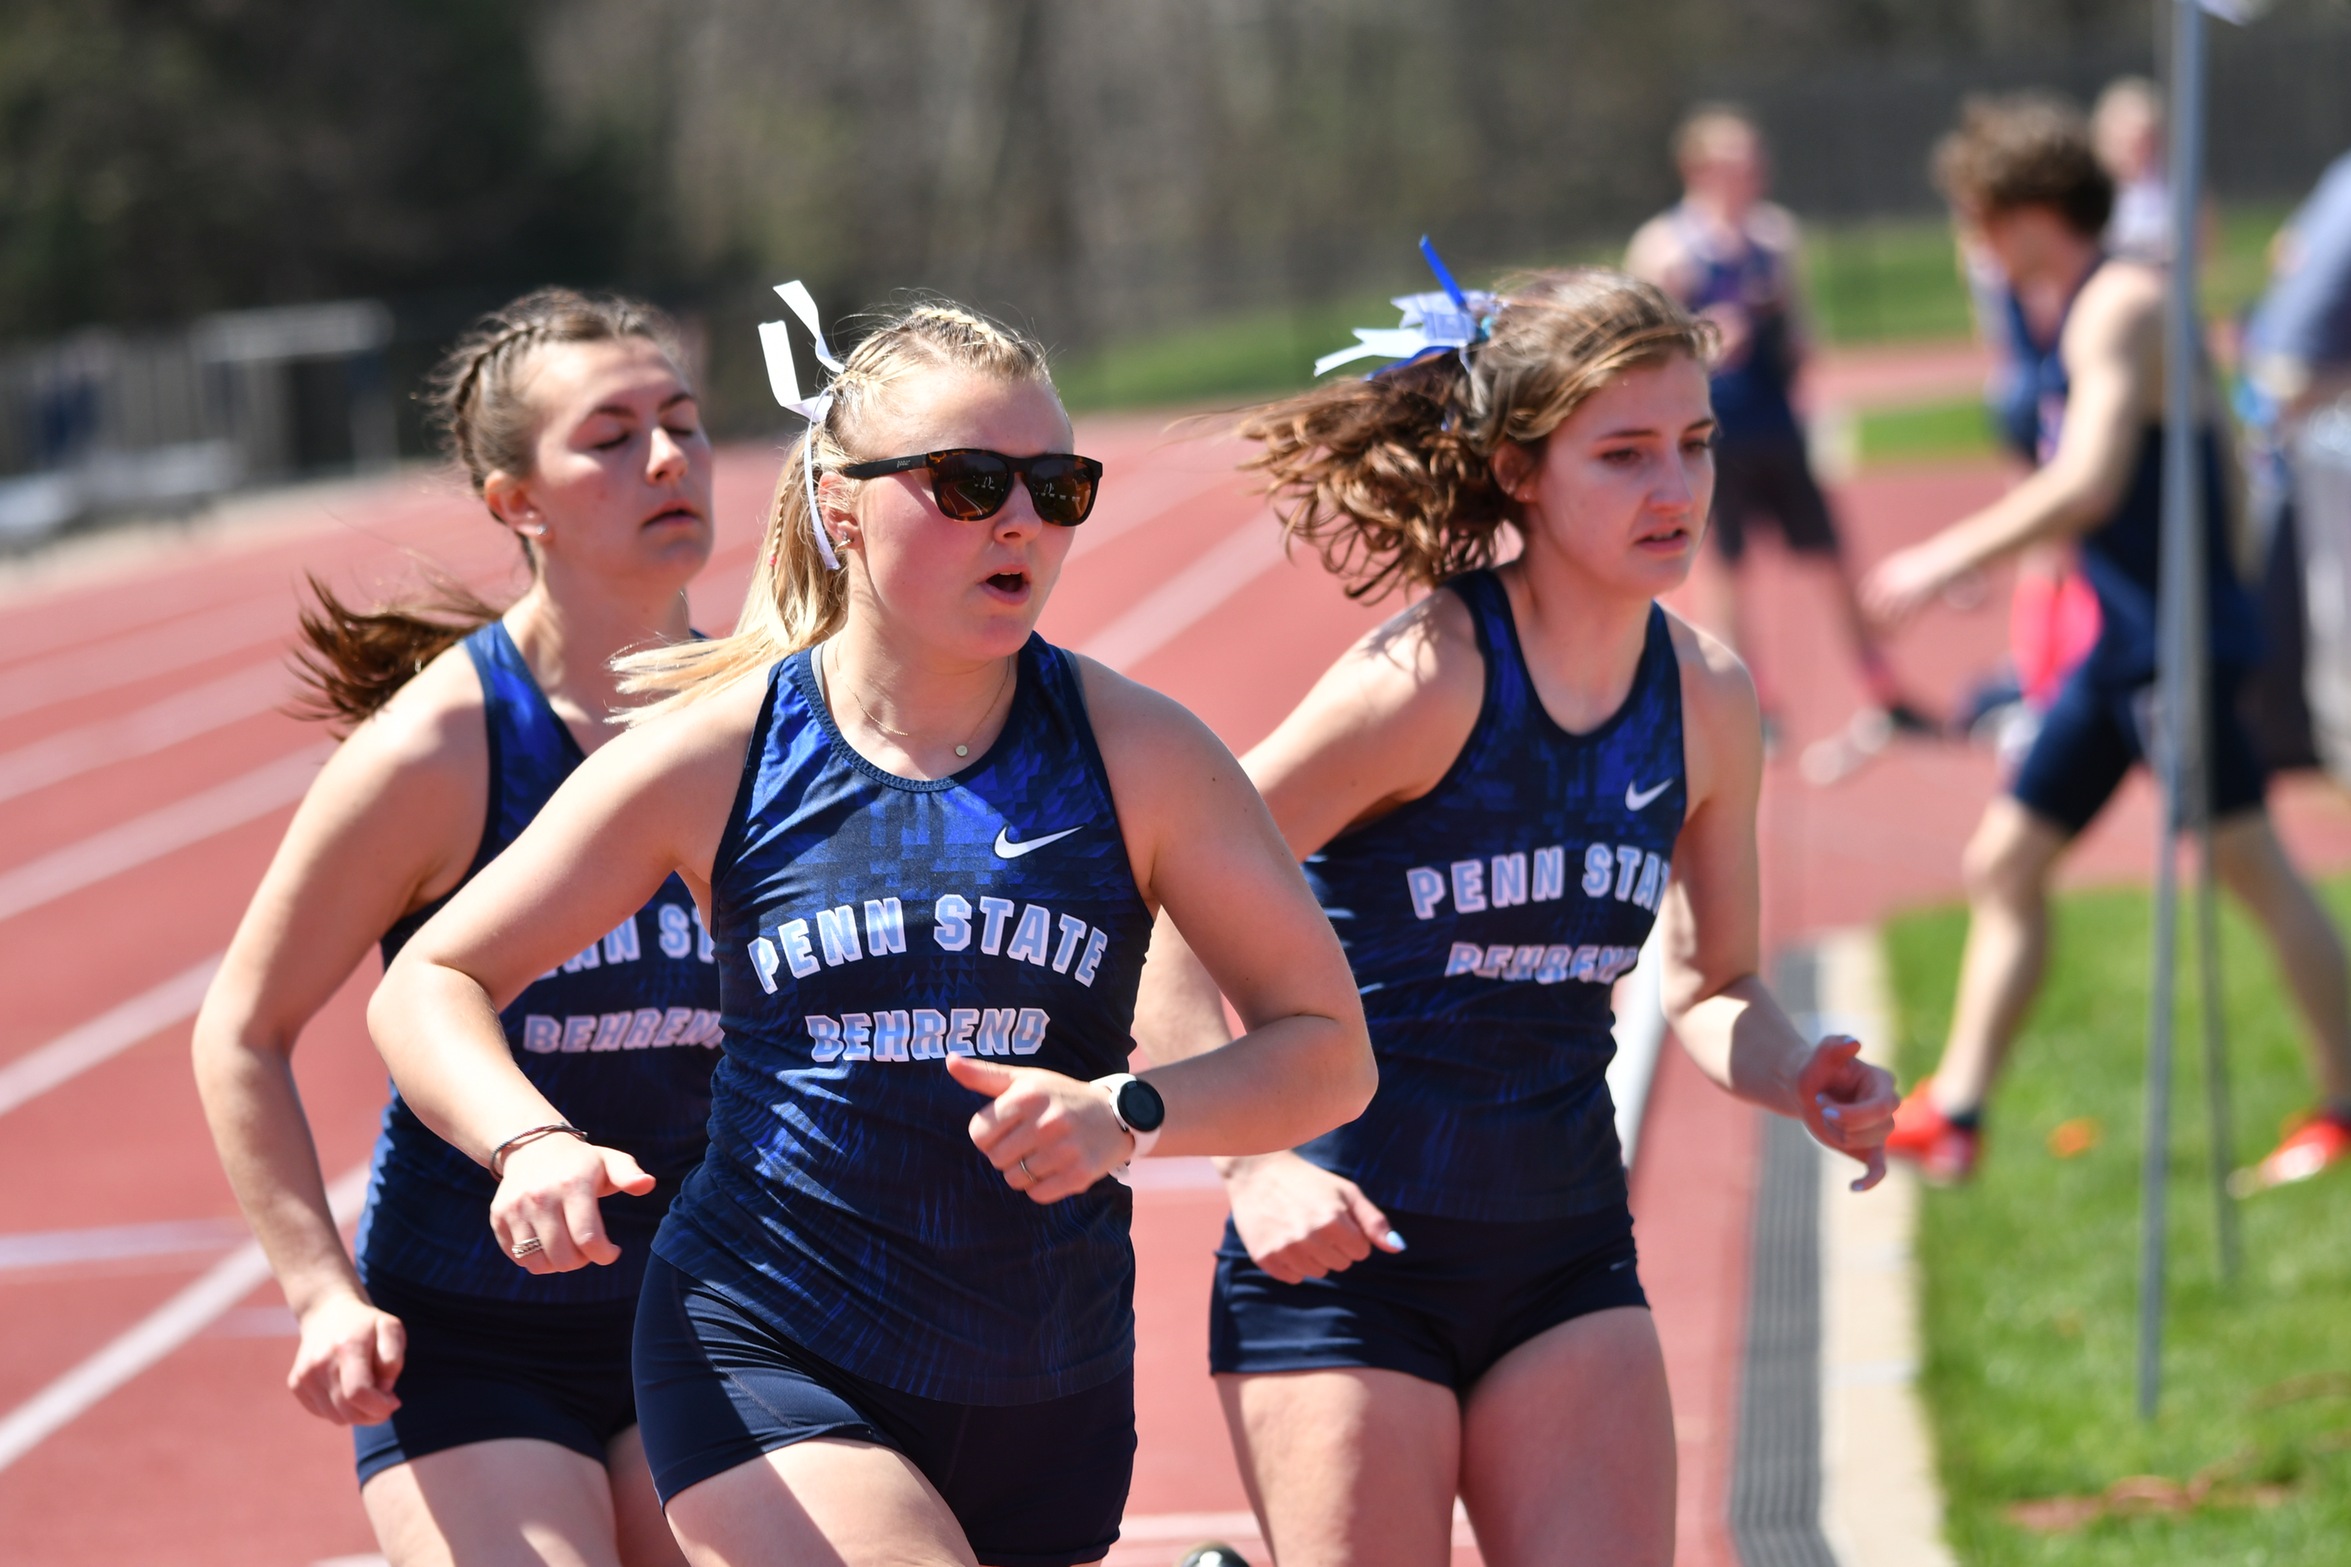 Women's Track and Field Ends Week With Meets at Allegheny and Baldwin Wallace